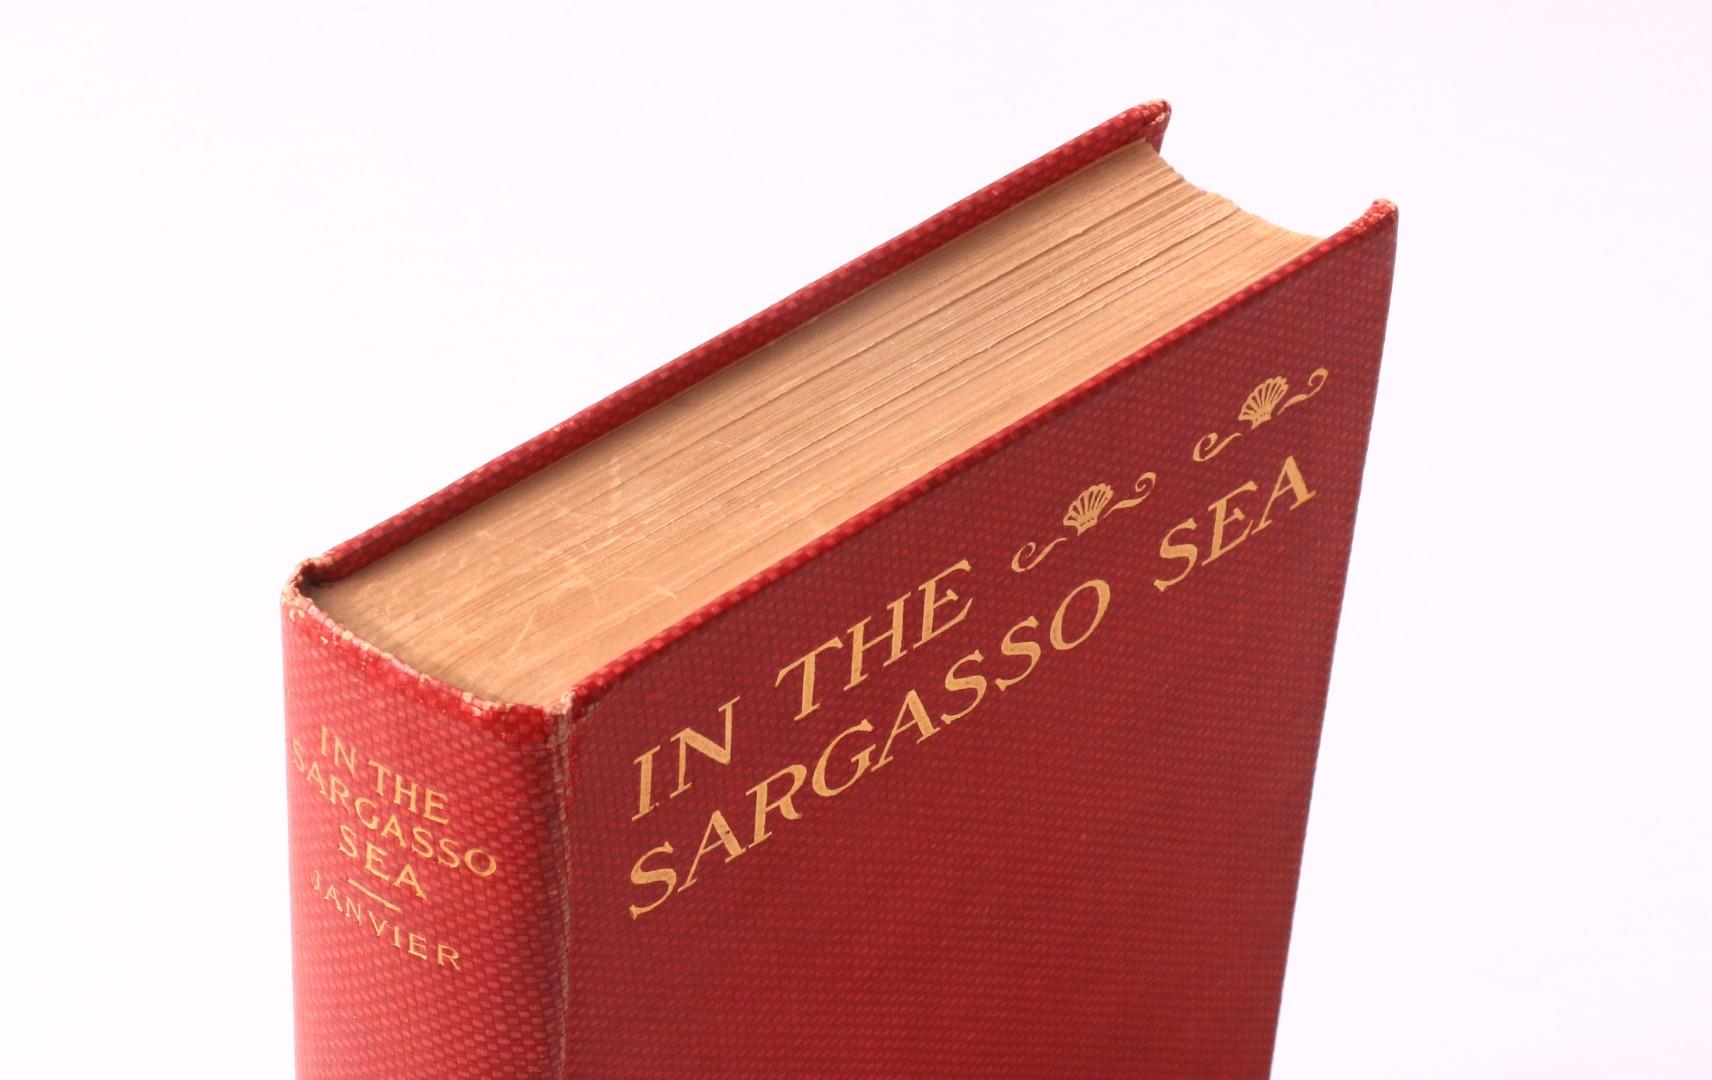 Thomas A. Janvier - In the Sargasso Sea - Harper & Brothers, 1898, Signed First Edition.